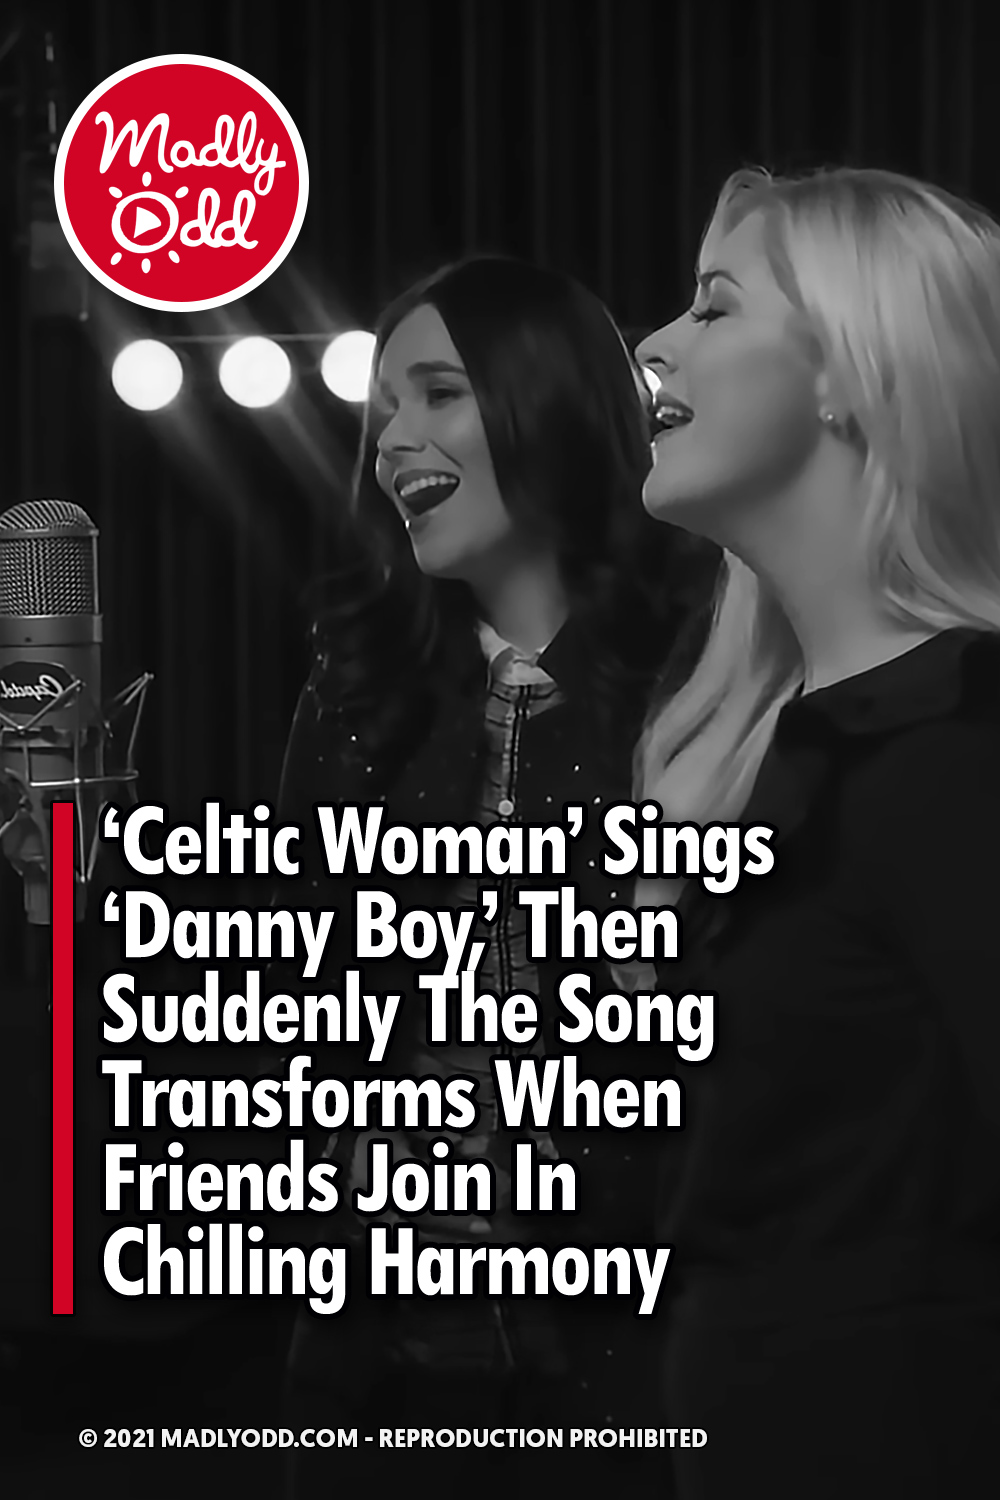 \'Celtic Woman\' Sings ‘Danny Boy,’ Then Suddenly The Song Transforms When Friends Join In Chilling Harmony